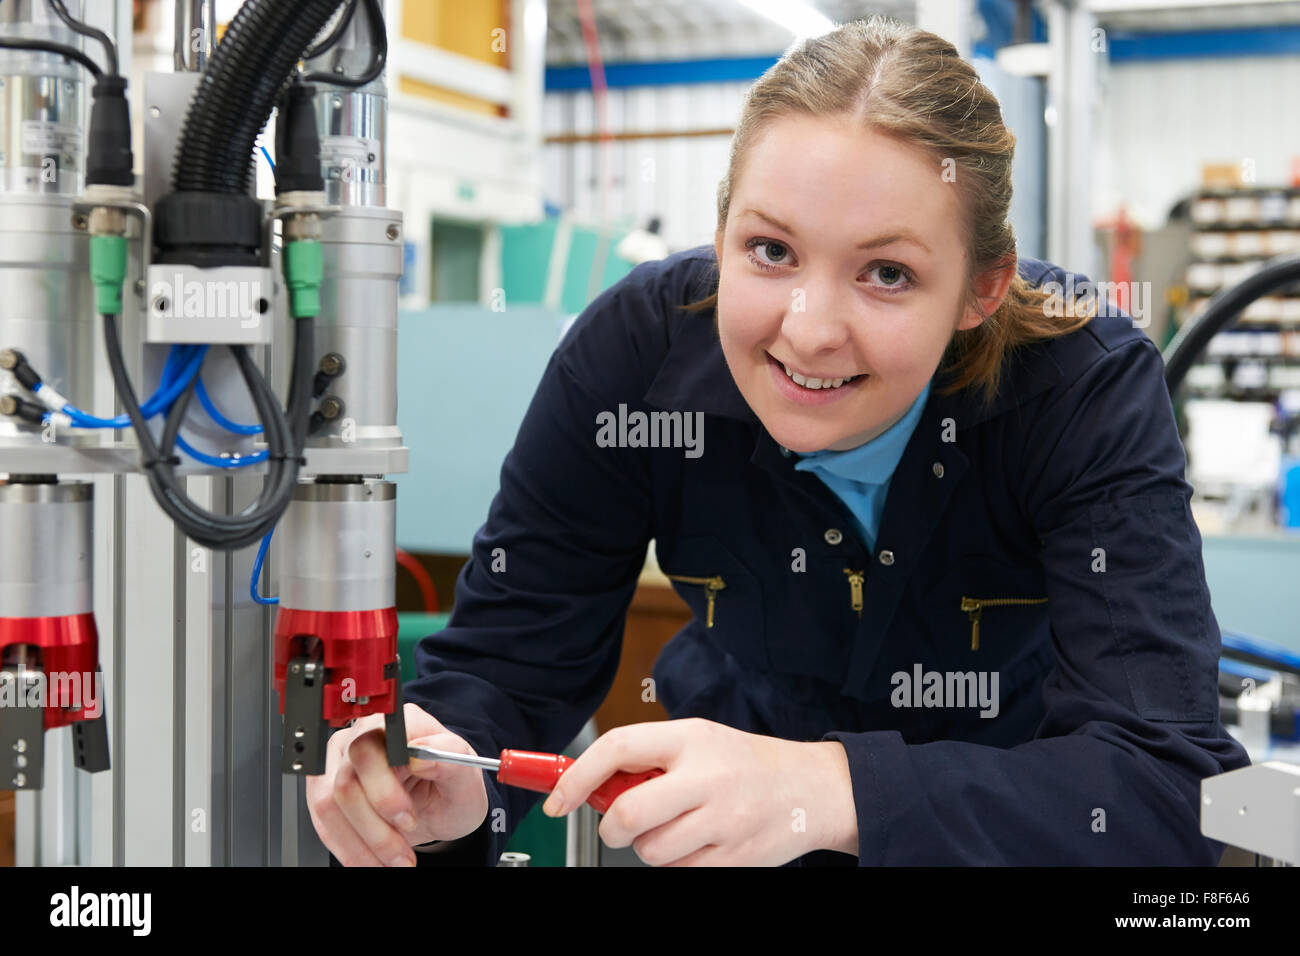 Female Apprentice Engineer Working On Machine In Factory Stock Photo